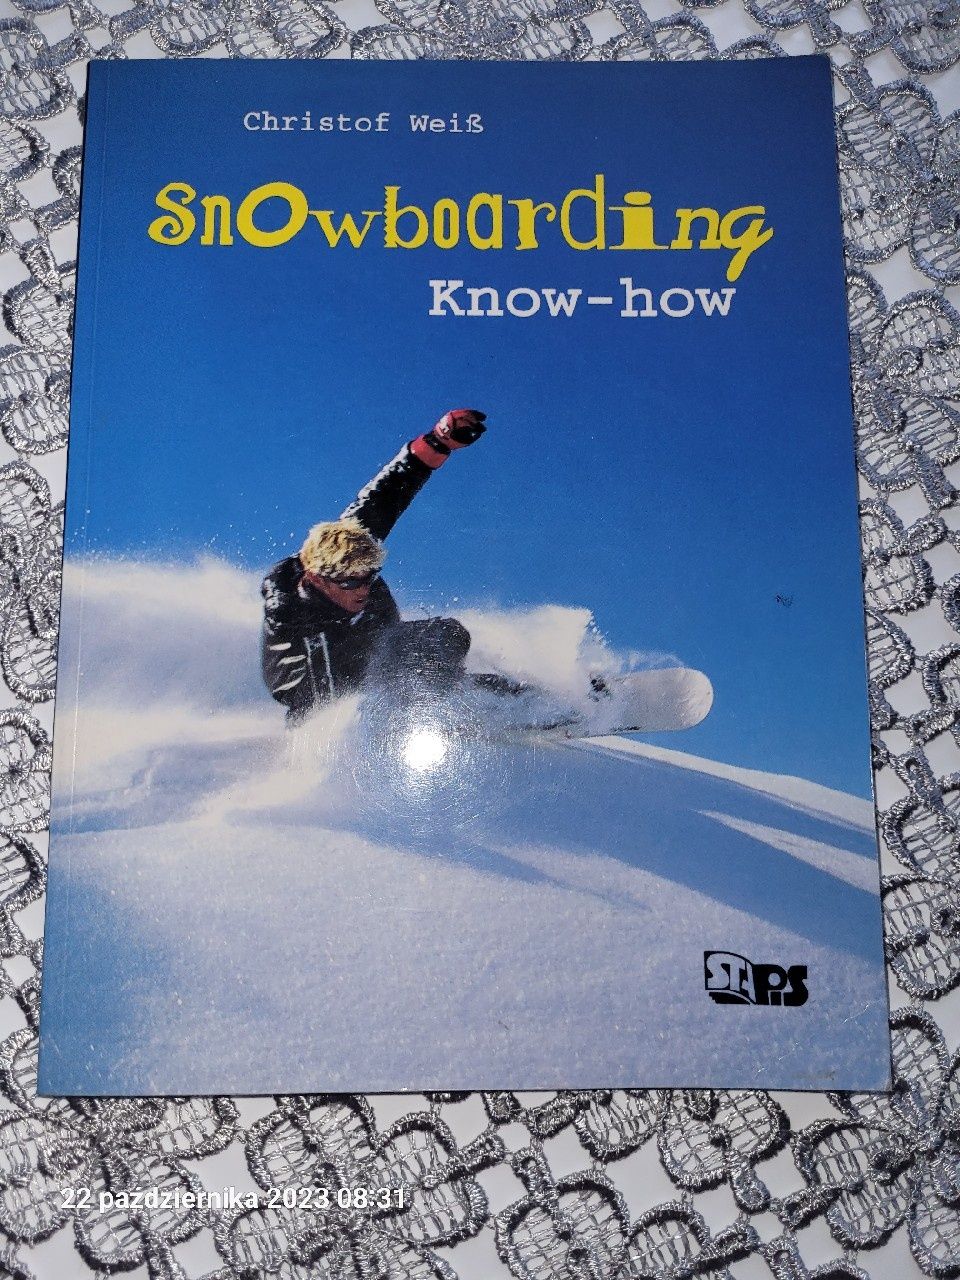 Snowboarding know-how Christof Weib